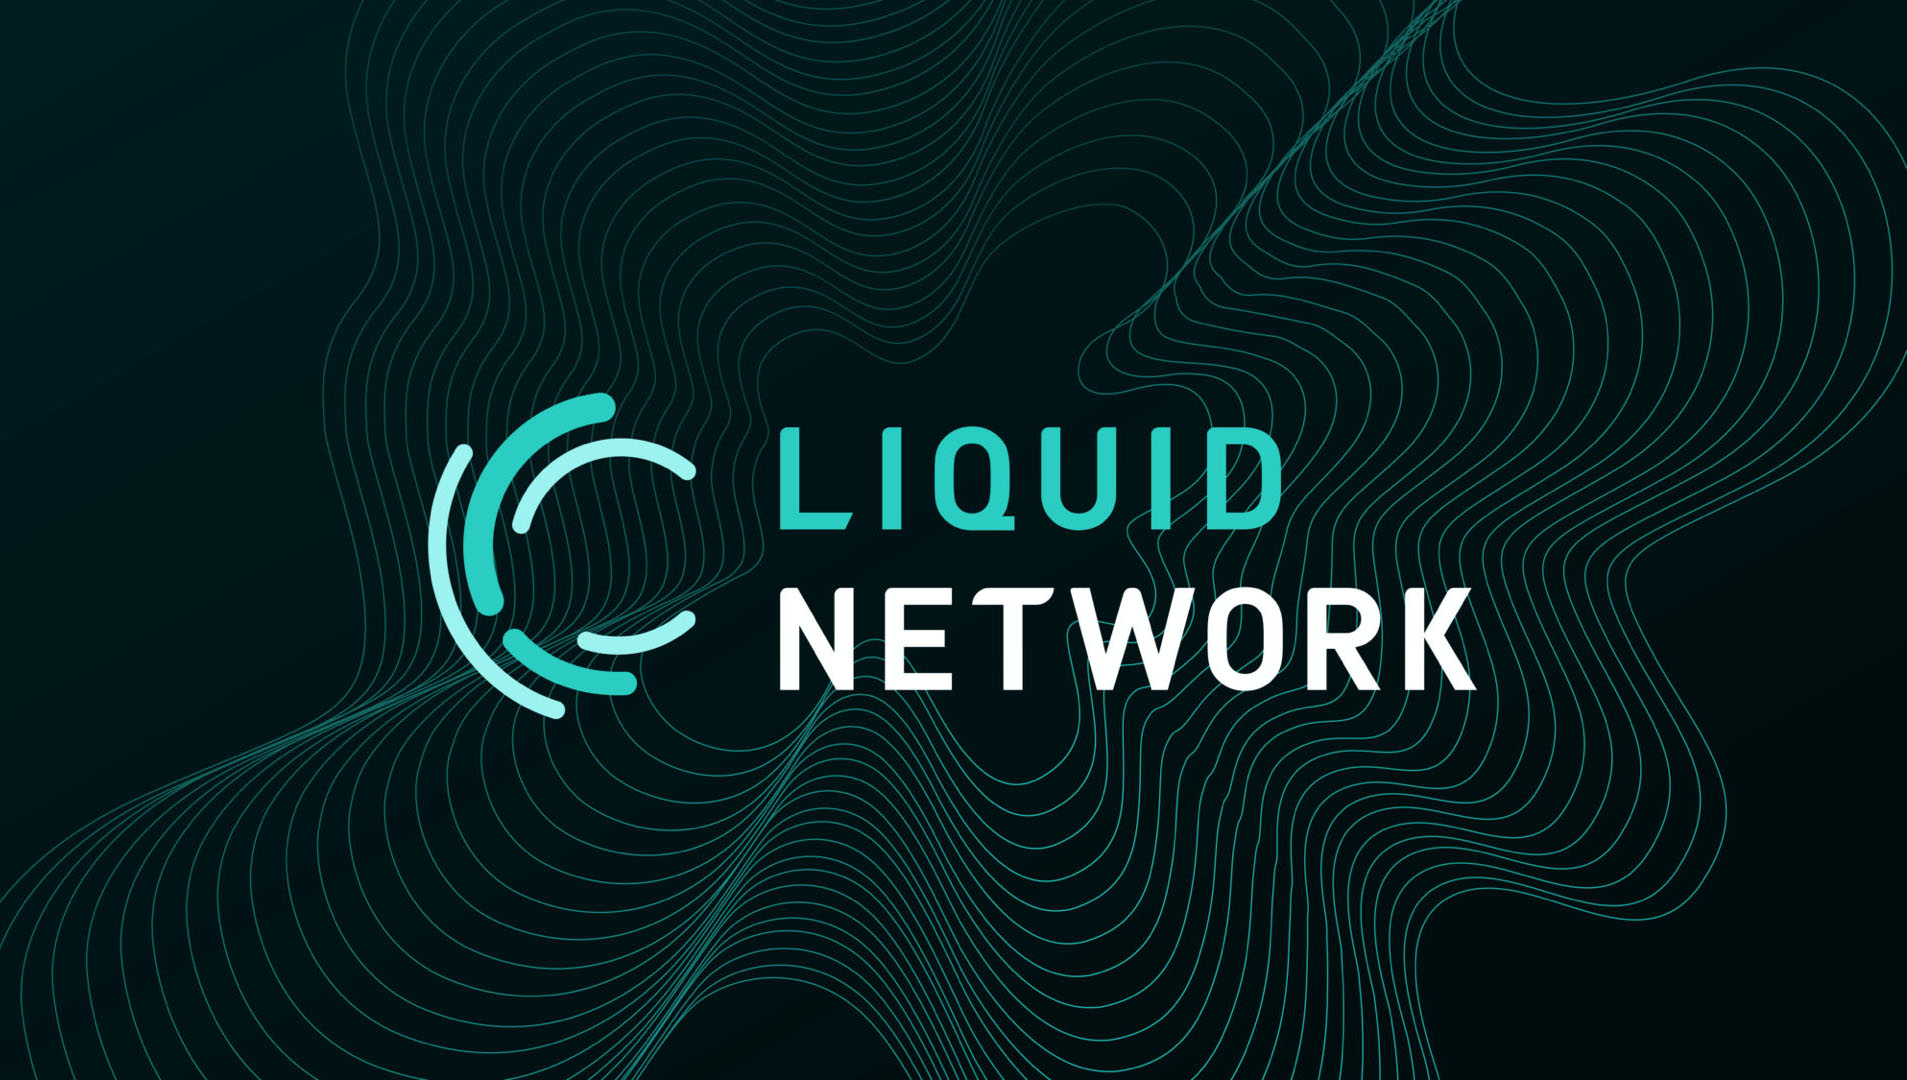 The Liquid Network’s Federation Adds Eight New Members